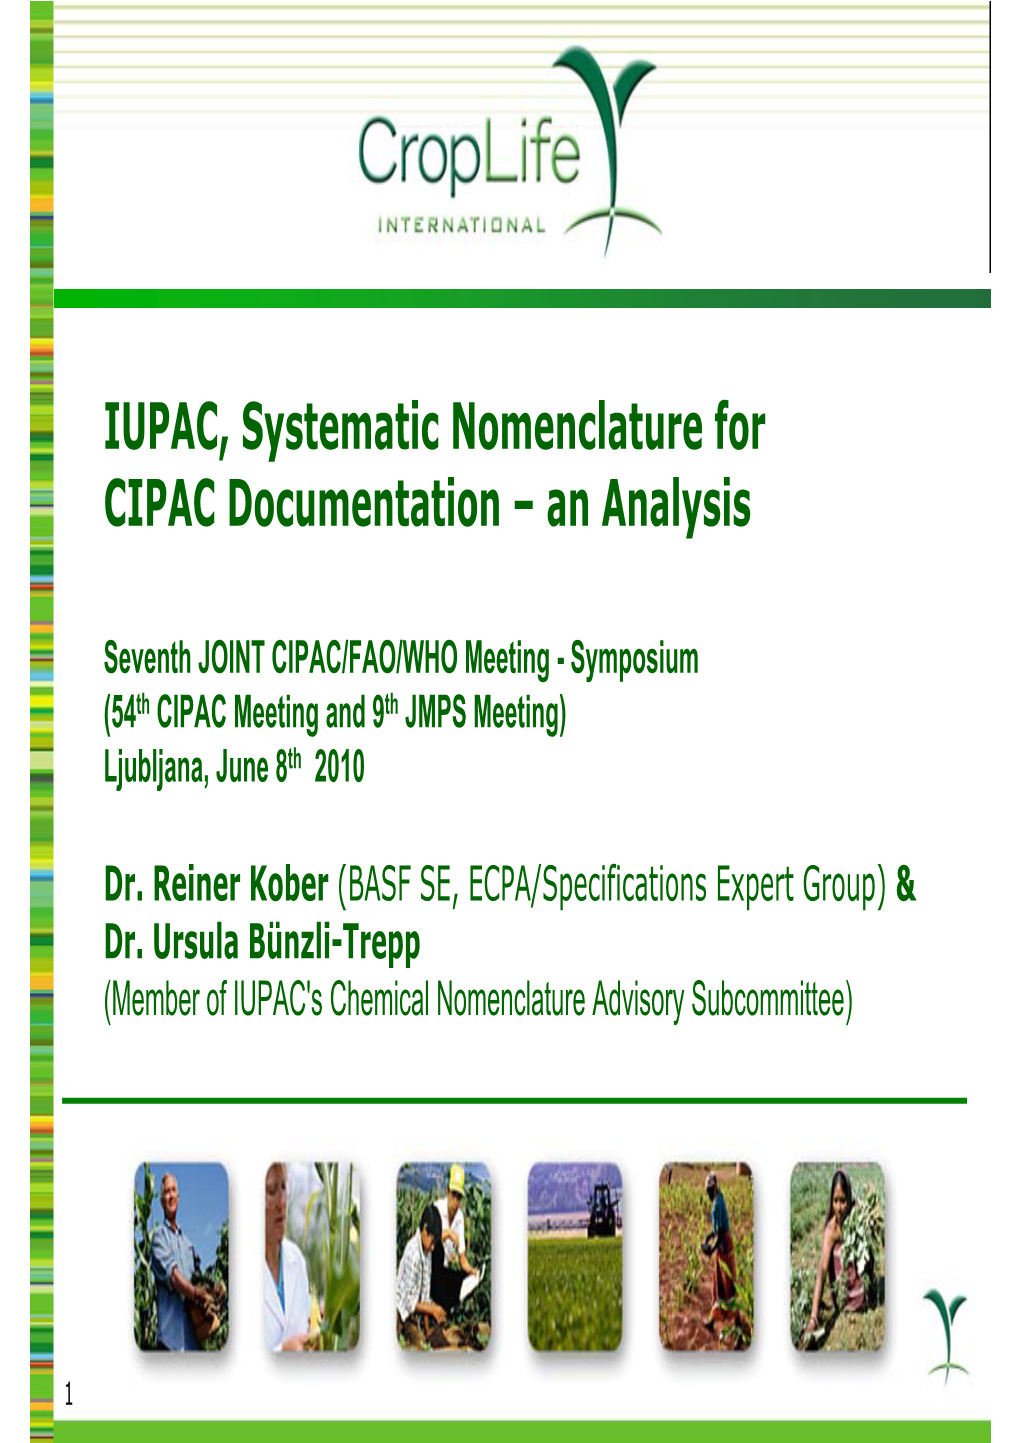 IUPAC, Systematic Nomenclature for CIPAC Documentation – an Analysis